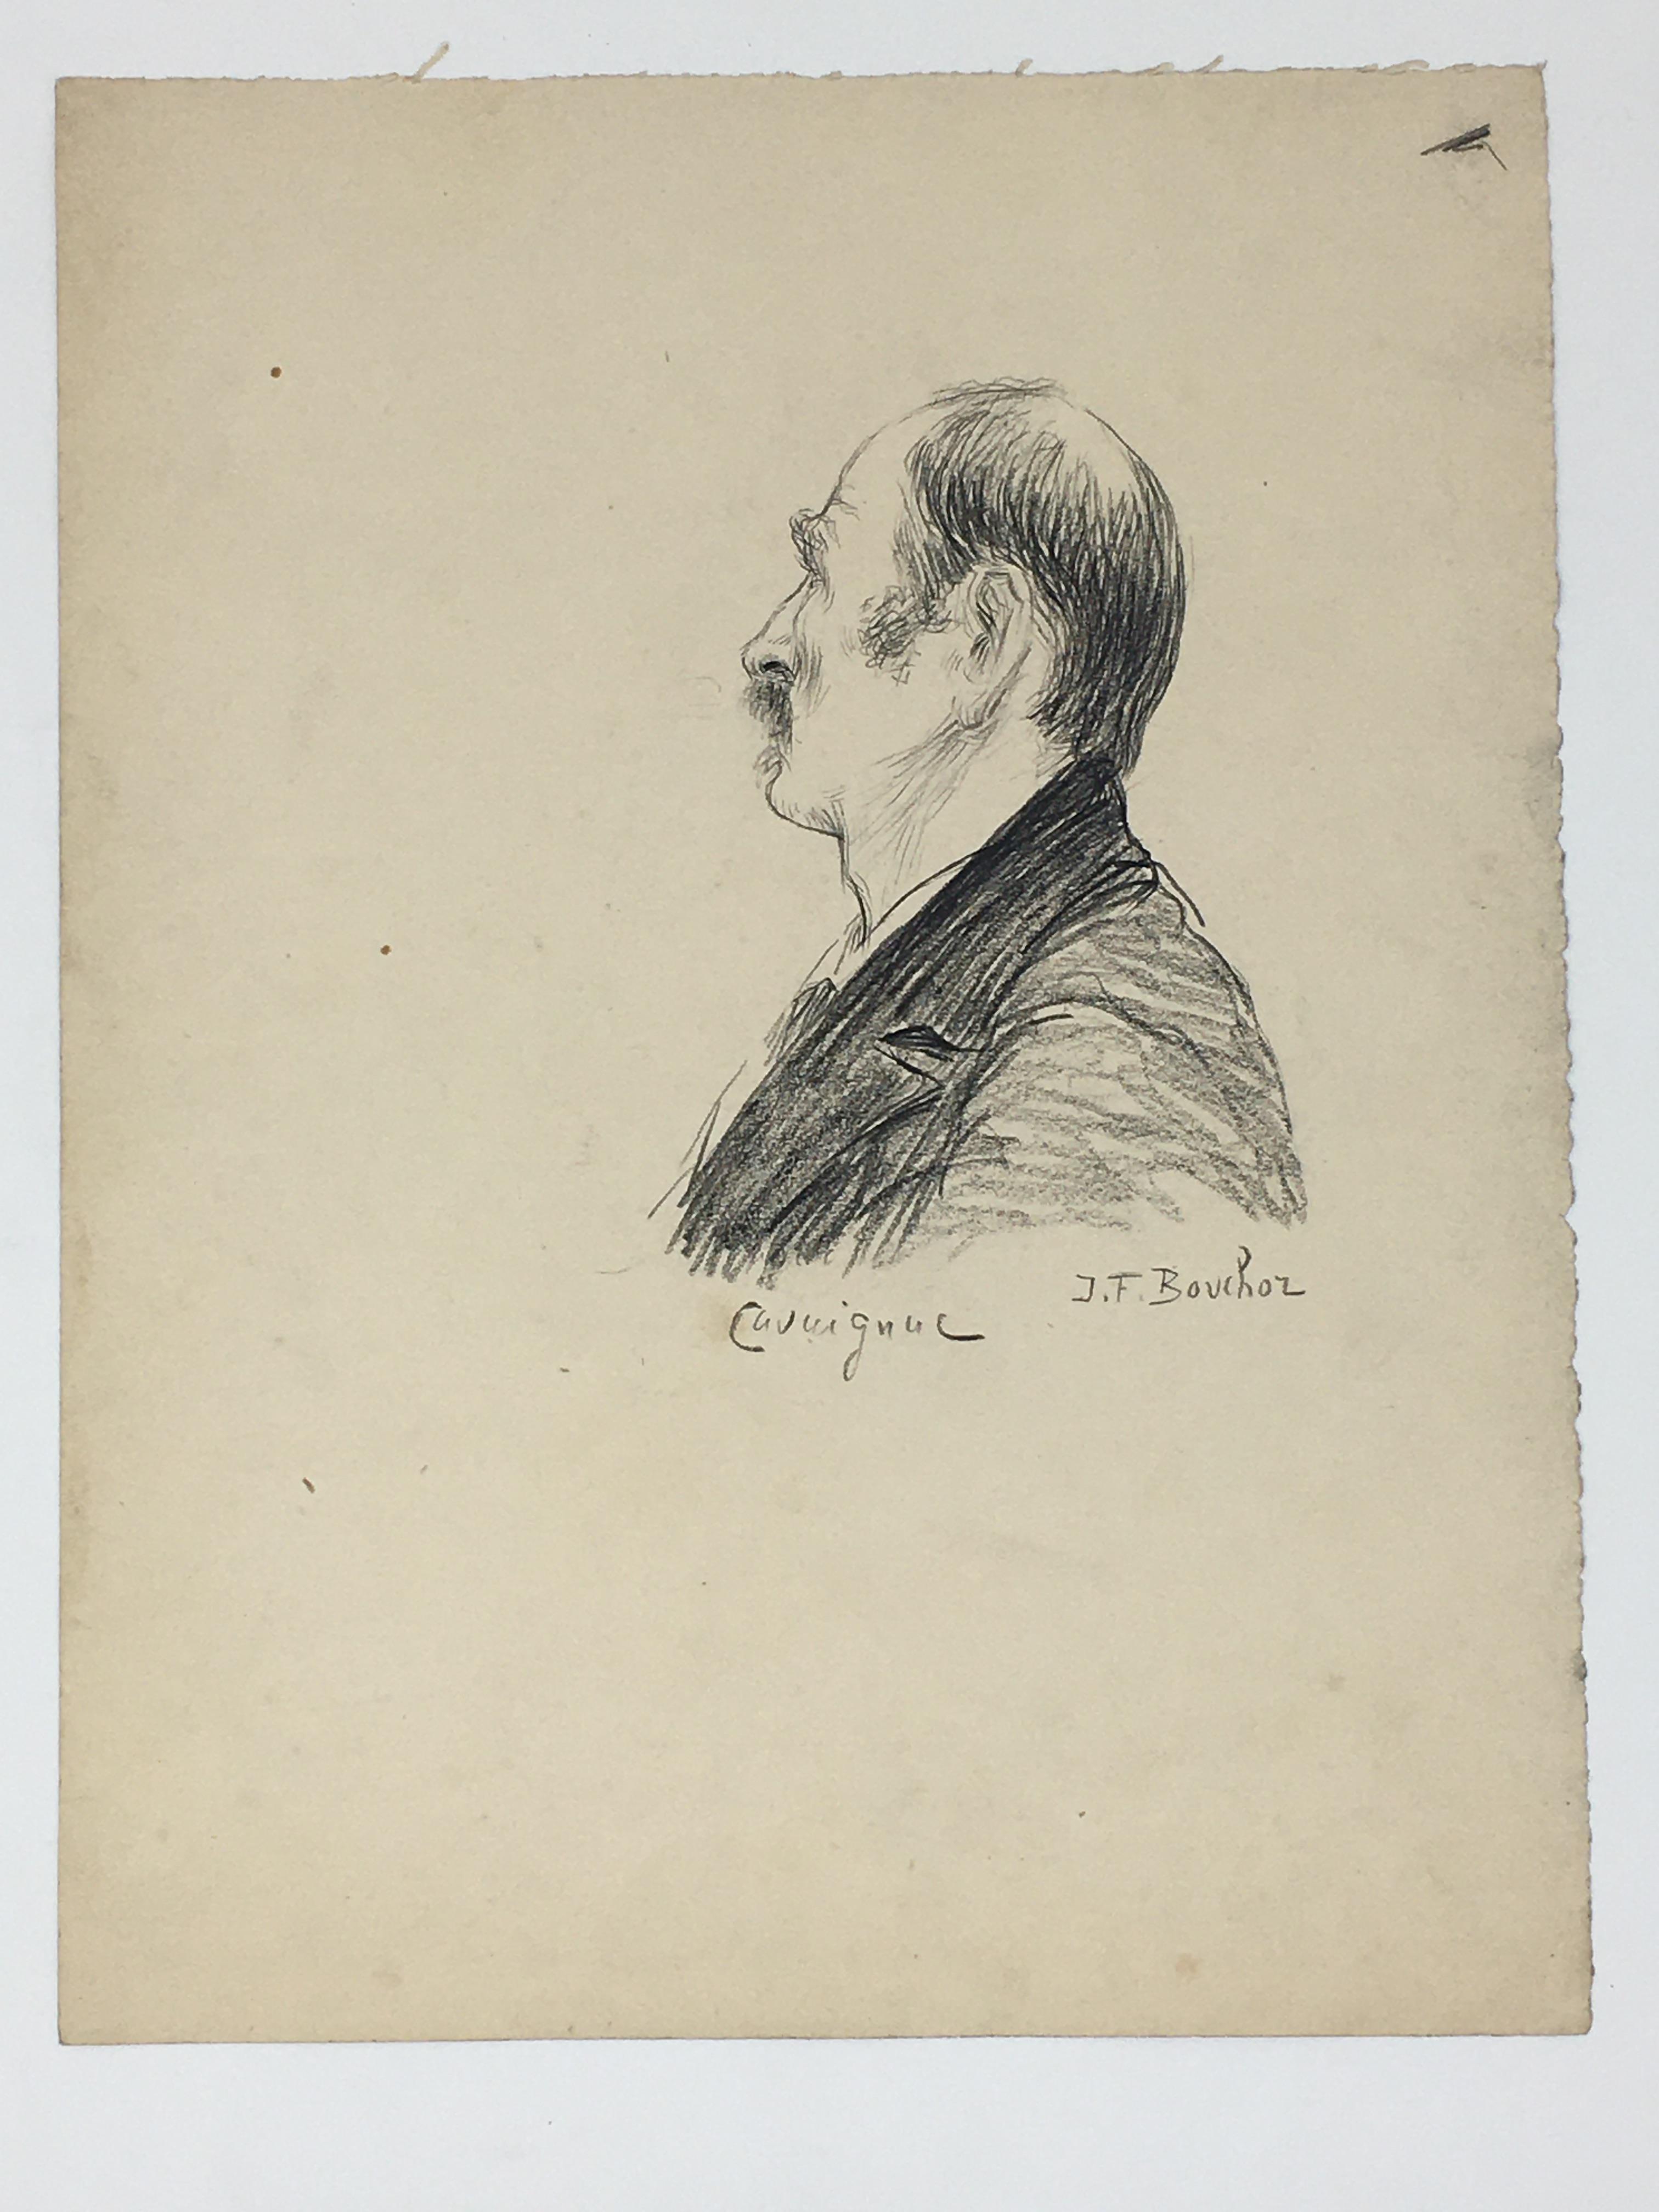 J'Accuse Newspaper, Emile Zola Quote, Signed Dreyfus Portrait, Rare Trial Drawings & Schwartzkoppen - Image 44 of 74